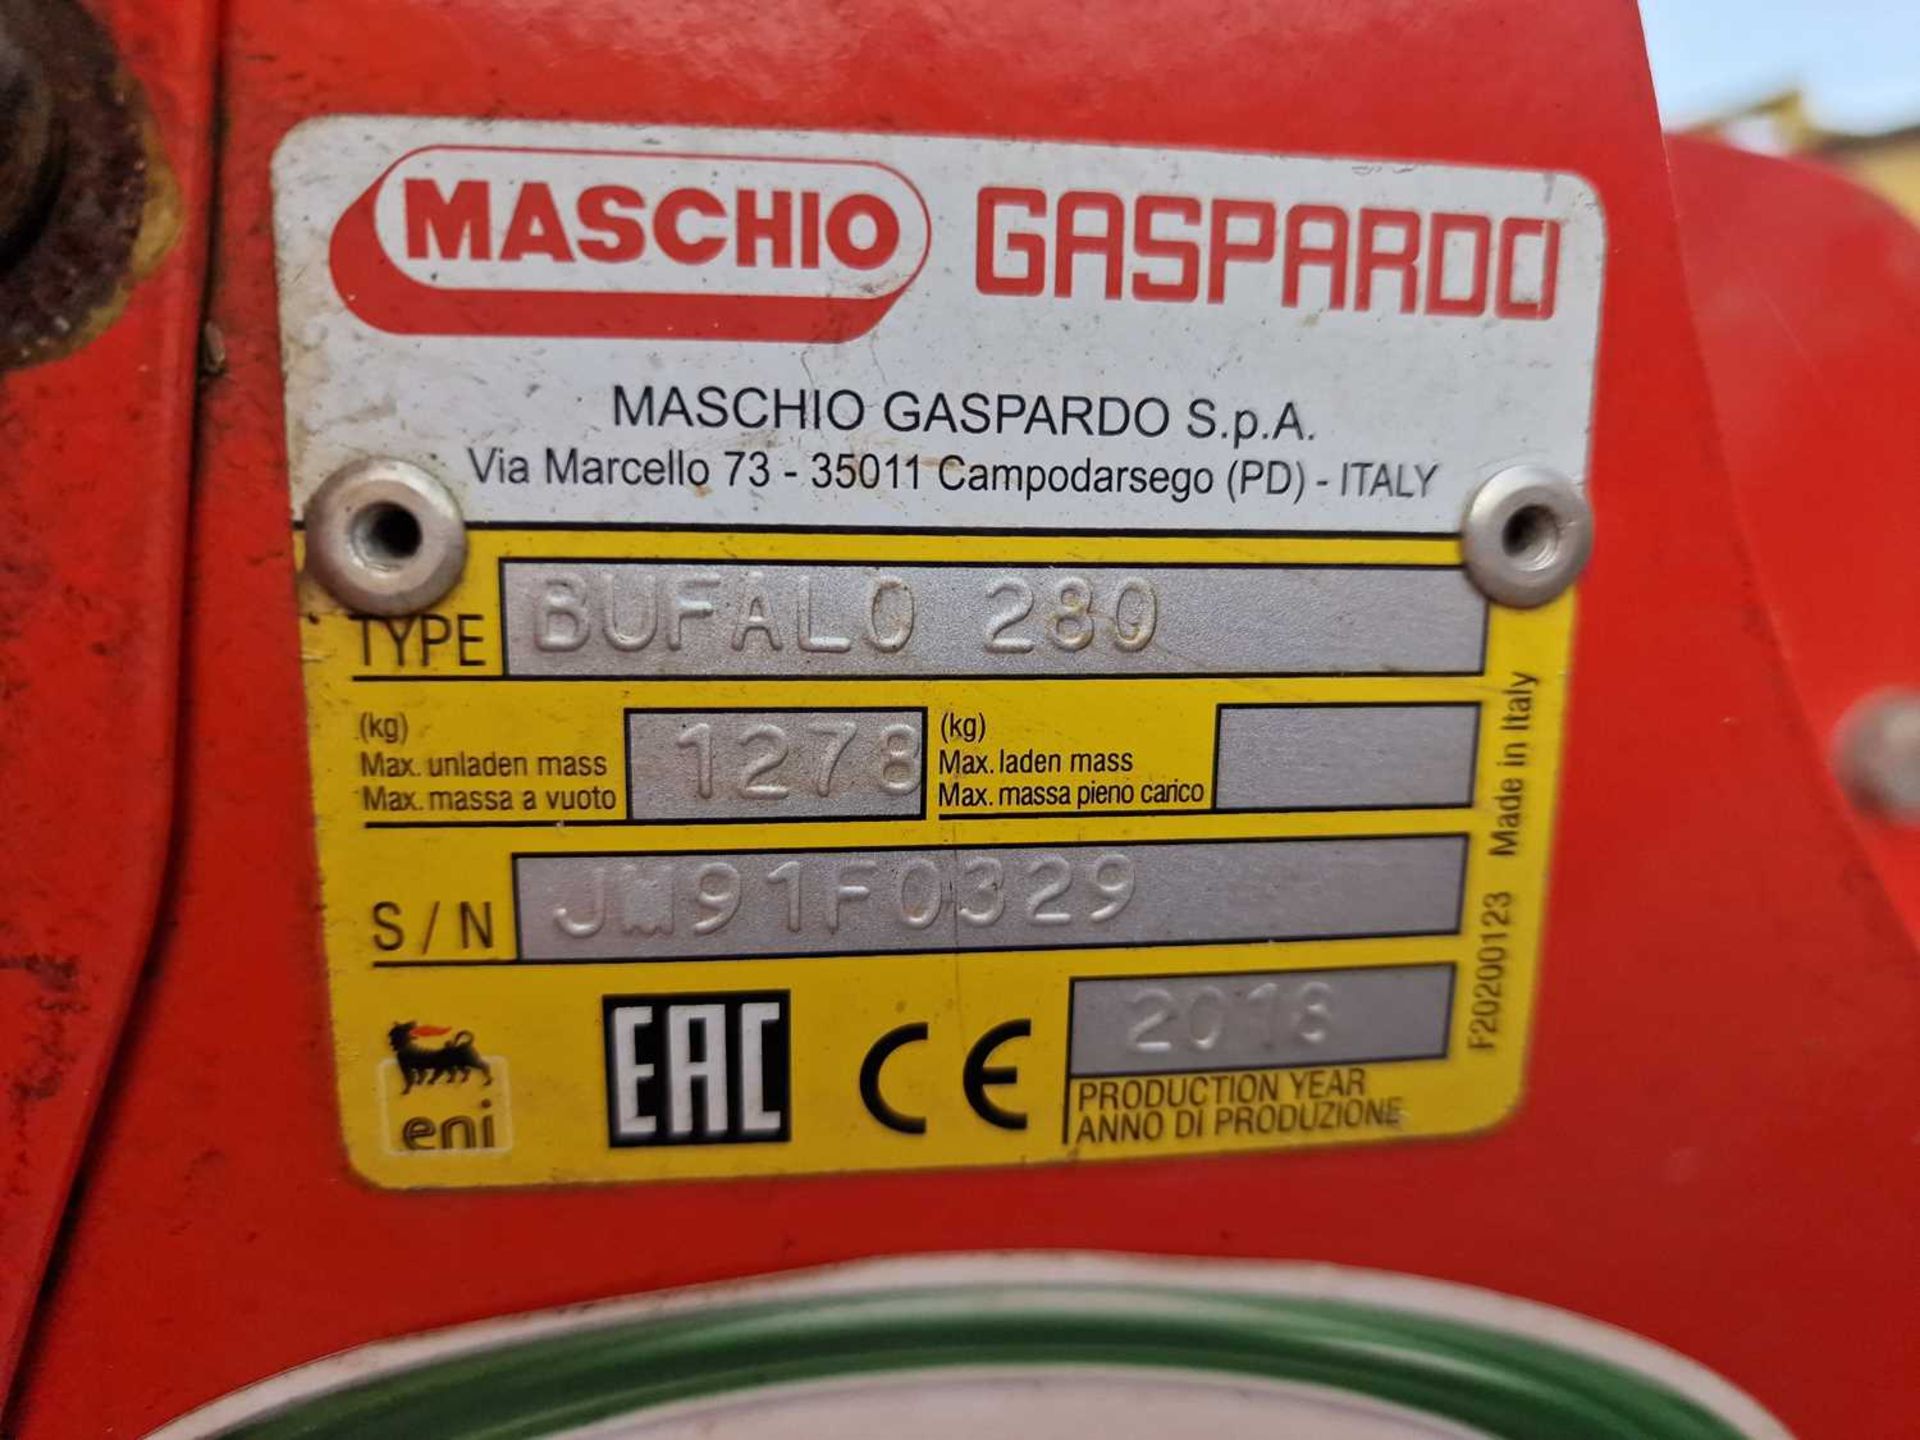 2018 Maschio Bufalo 280 PTO Driven Topper, Side Shift to suit 3 Point Linkage - Image 11 of 11